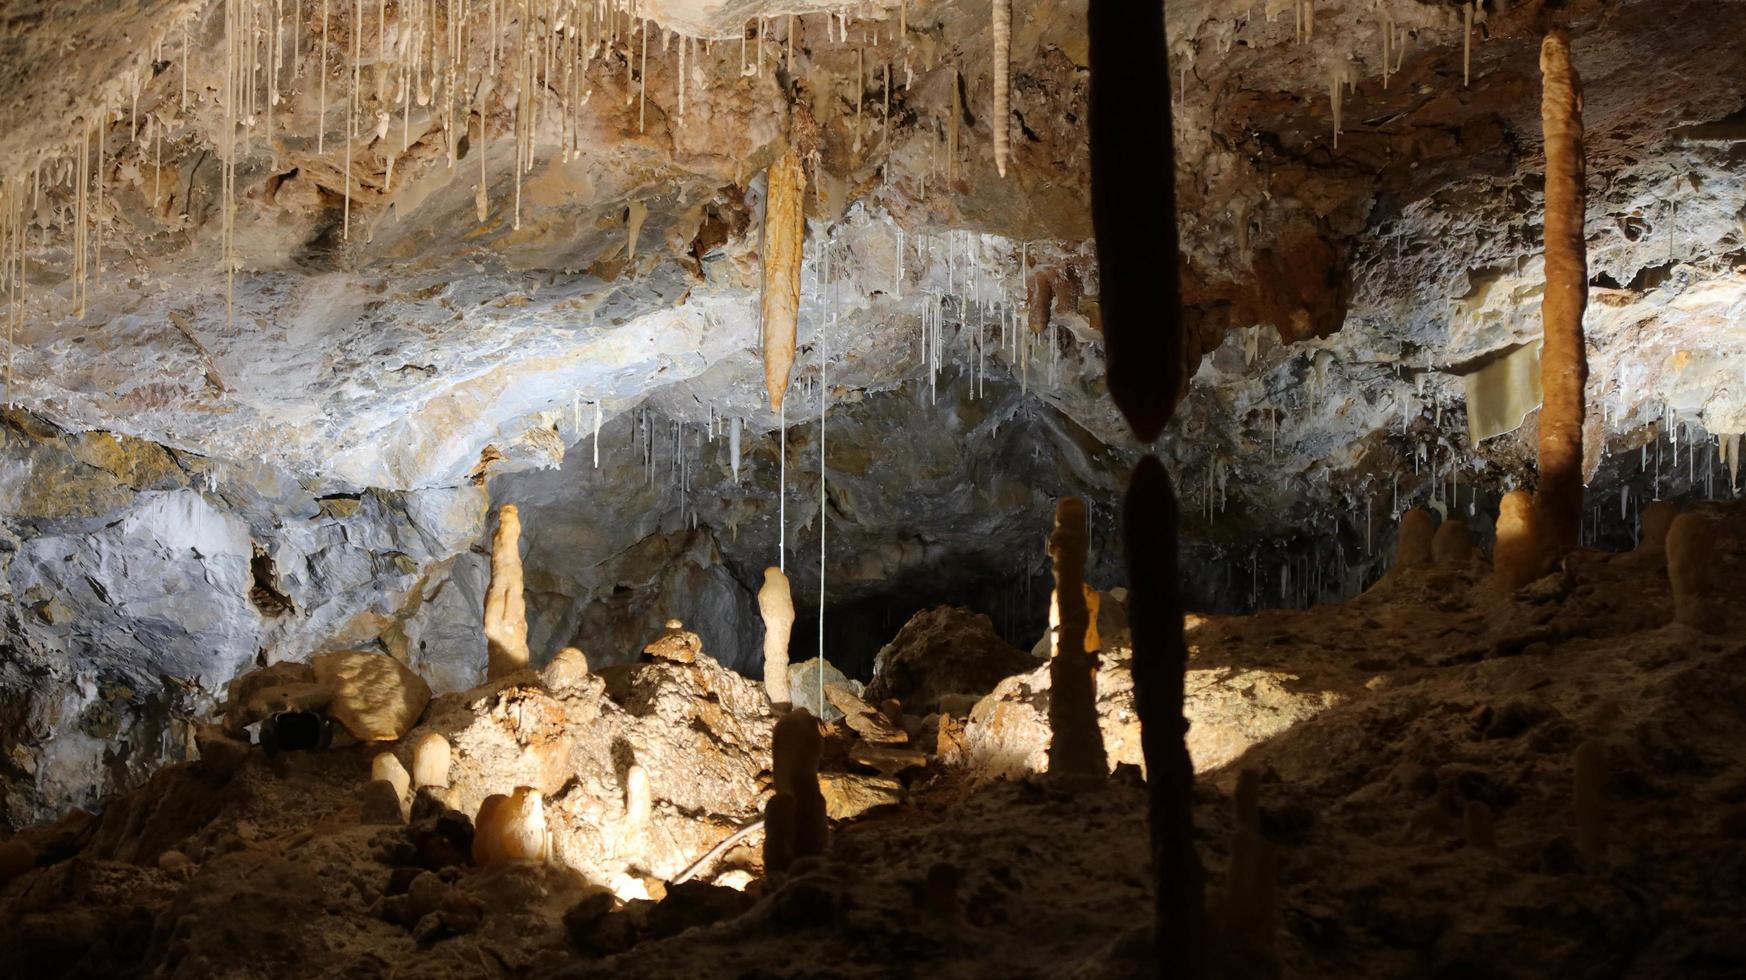 the spectacular caves of Borgio Verezzi, with its stalactites and stalagmites, in Liguria in the spring of 2022 photo